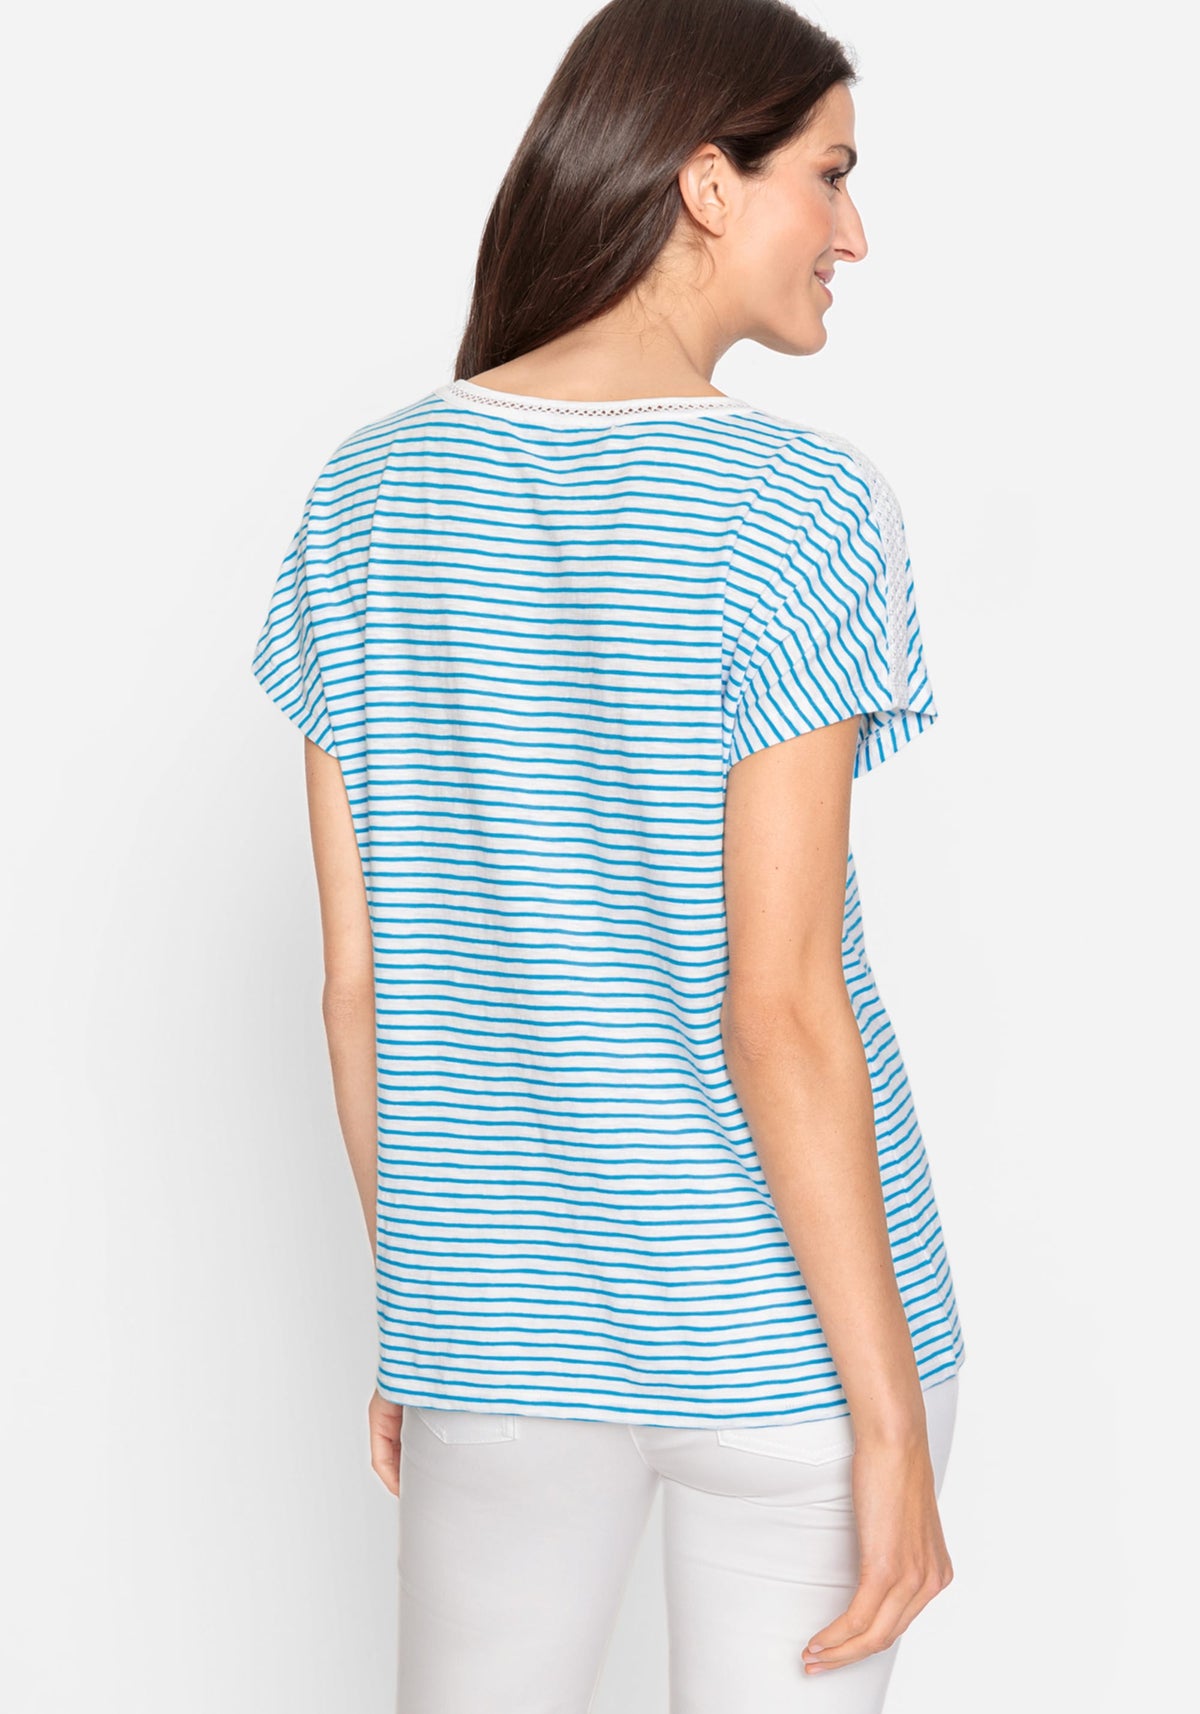 100% Cotton Short Sleeve Striped Tee with Lace Trim